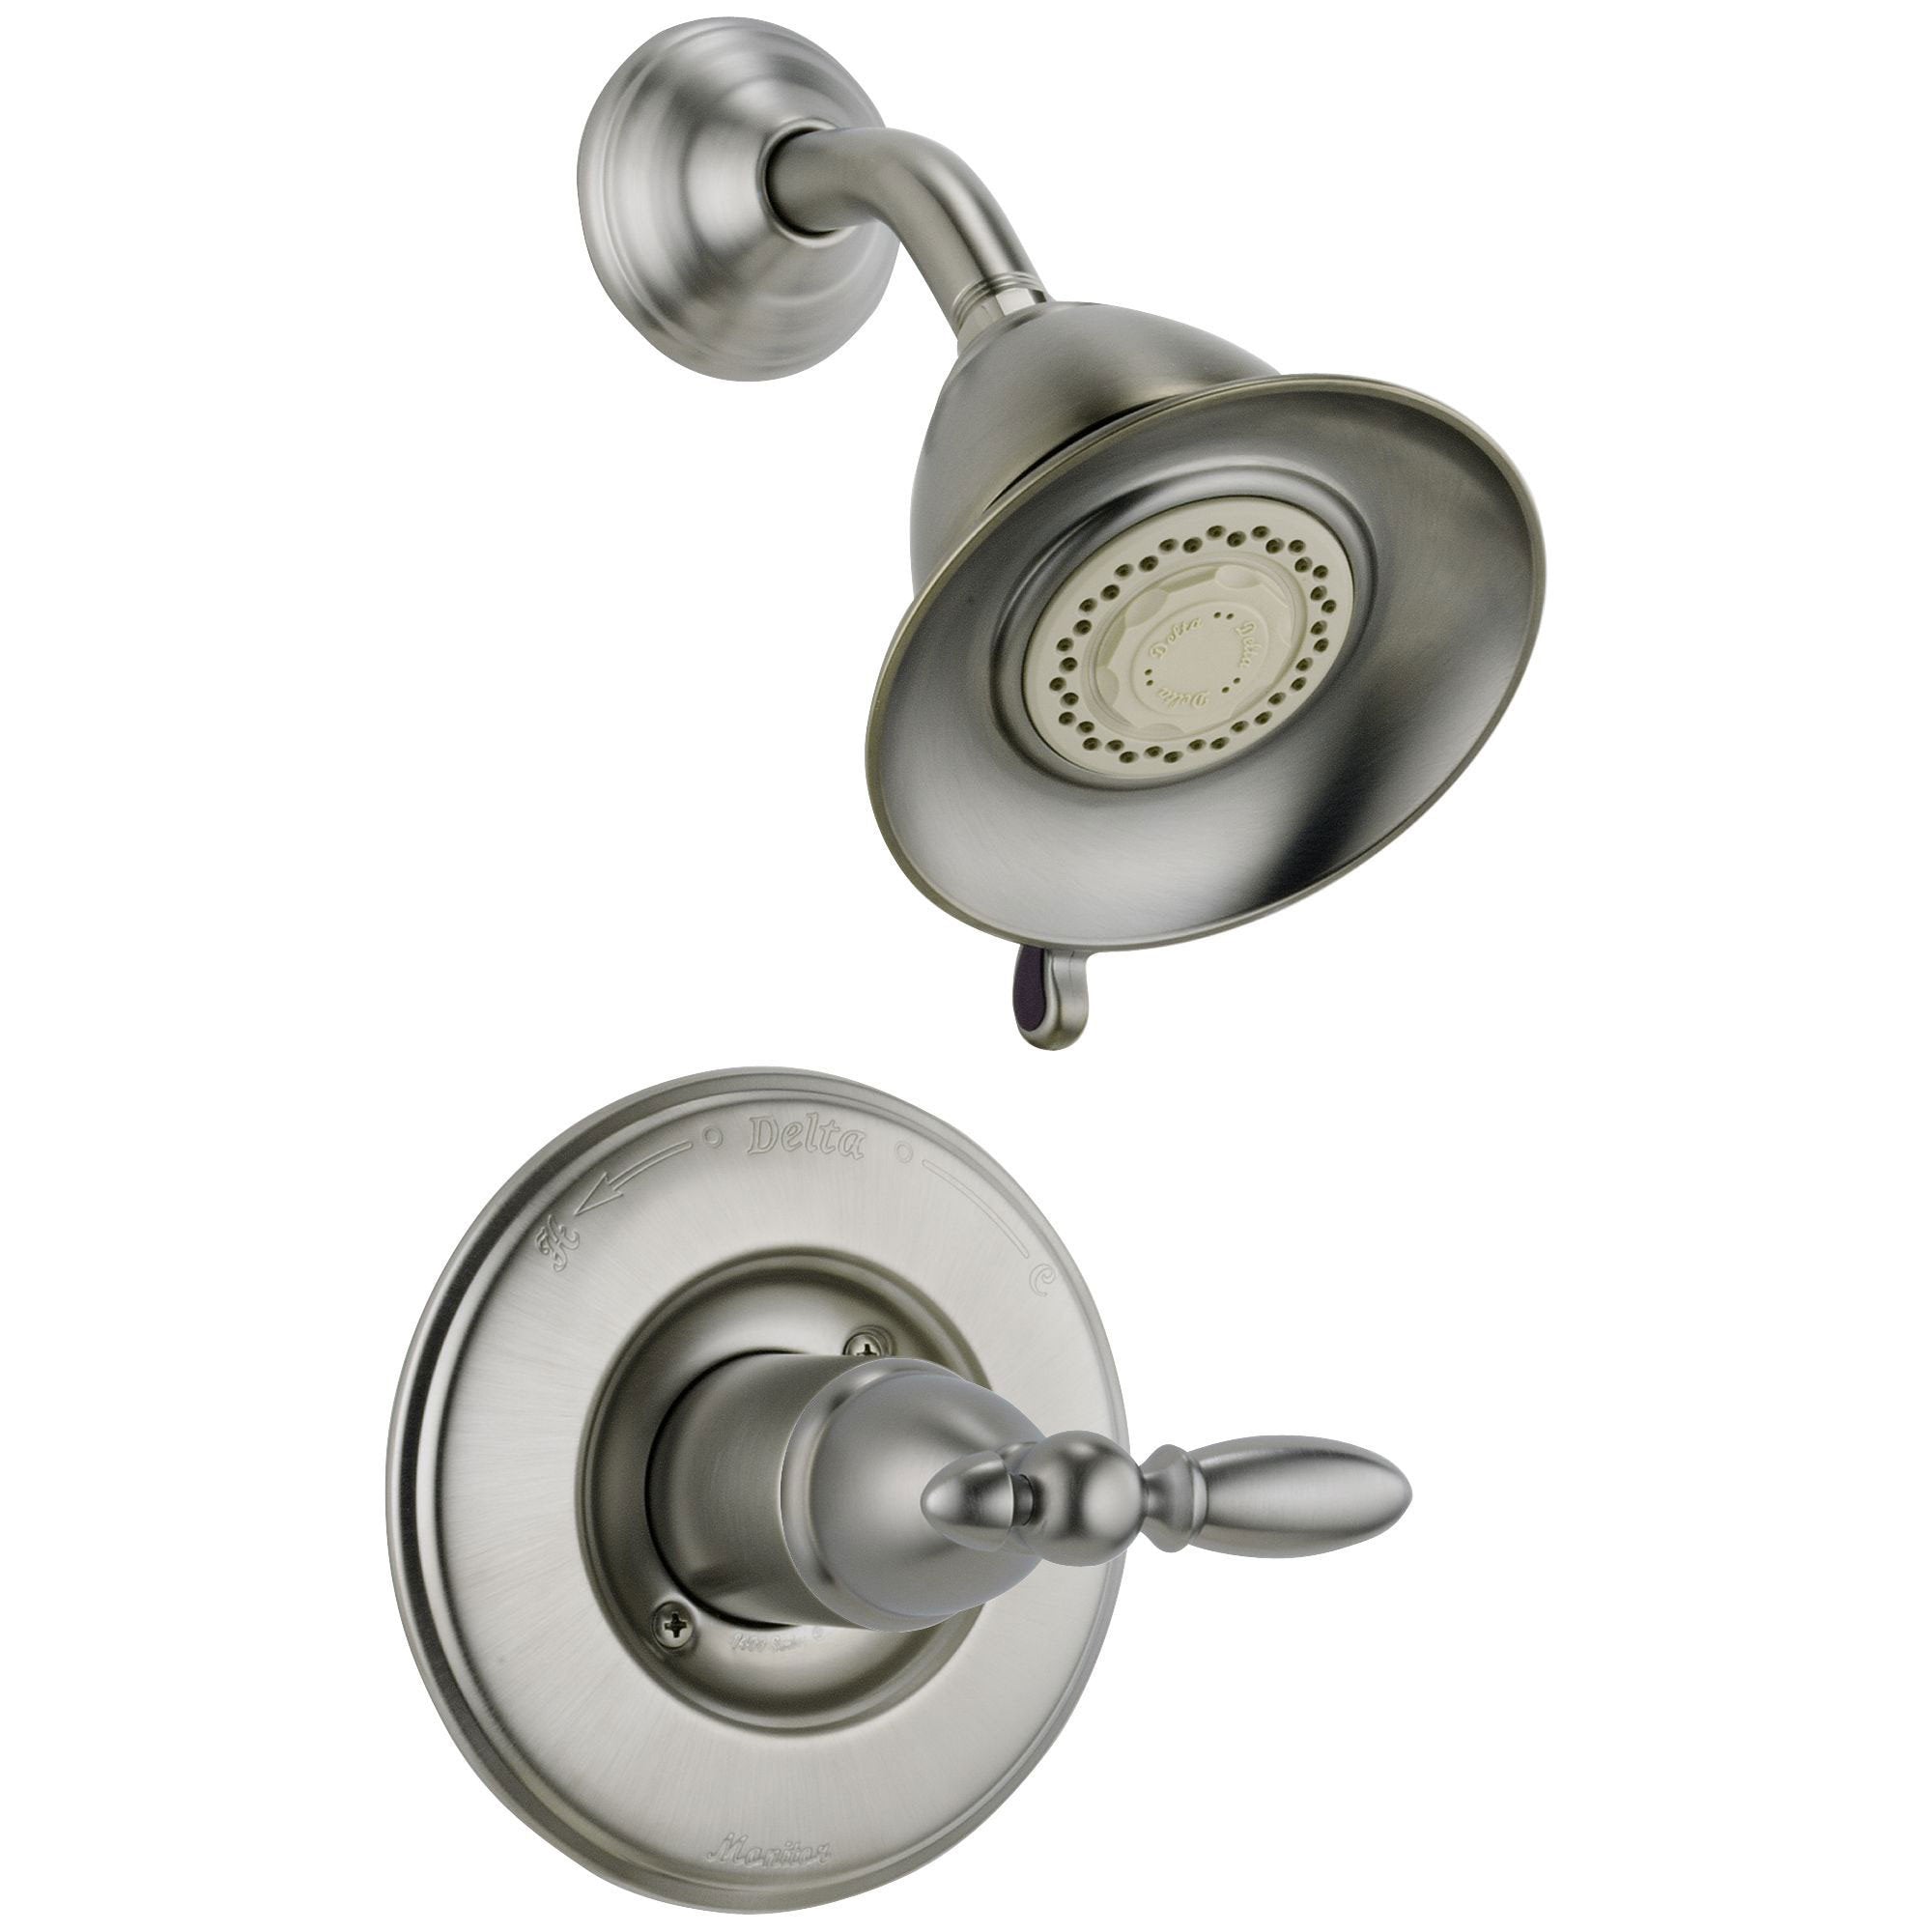 Delta Traditional Victorian Stainless Steel Finish 14 Series Shower Only Faucet INCLUDES Rough-in Valve and Single Lever Handle D1194V